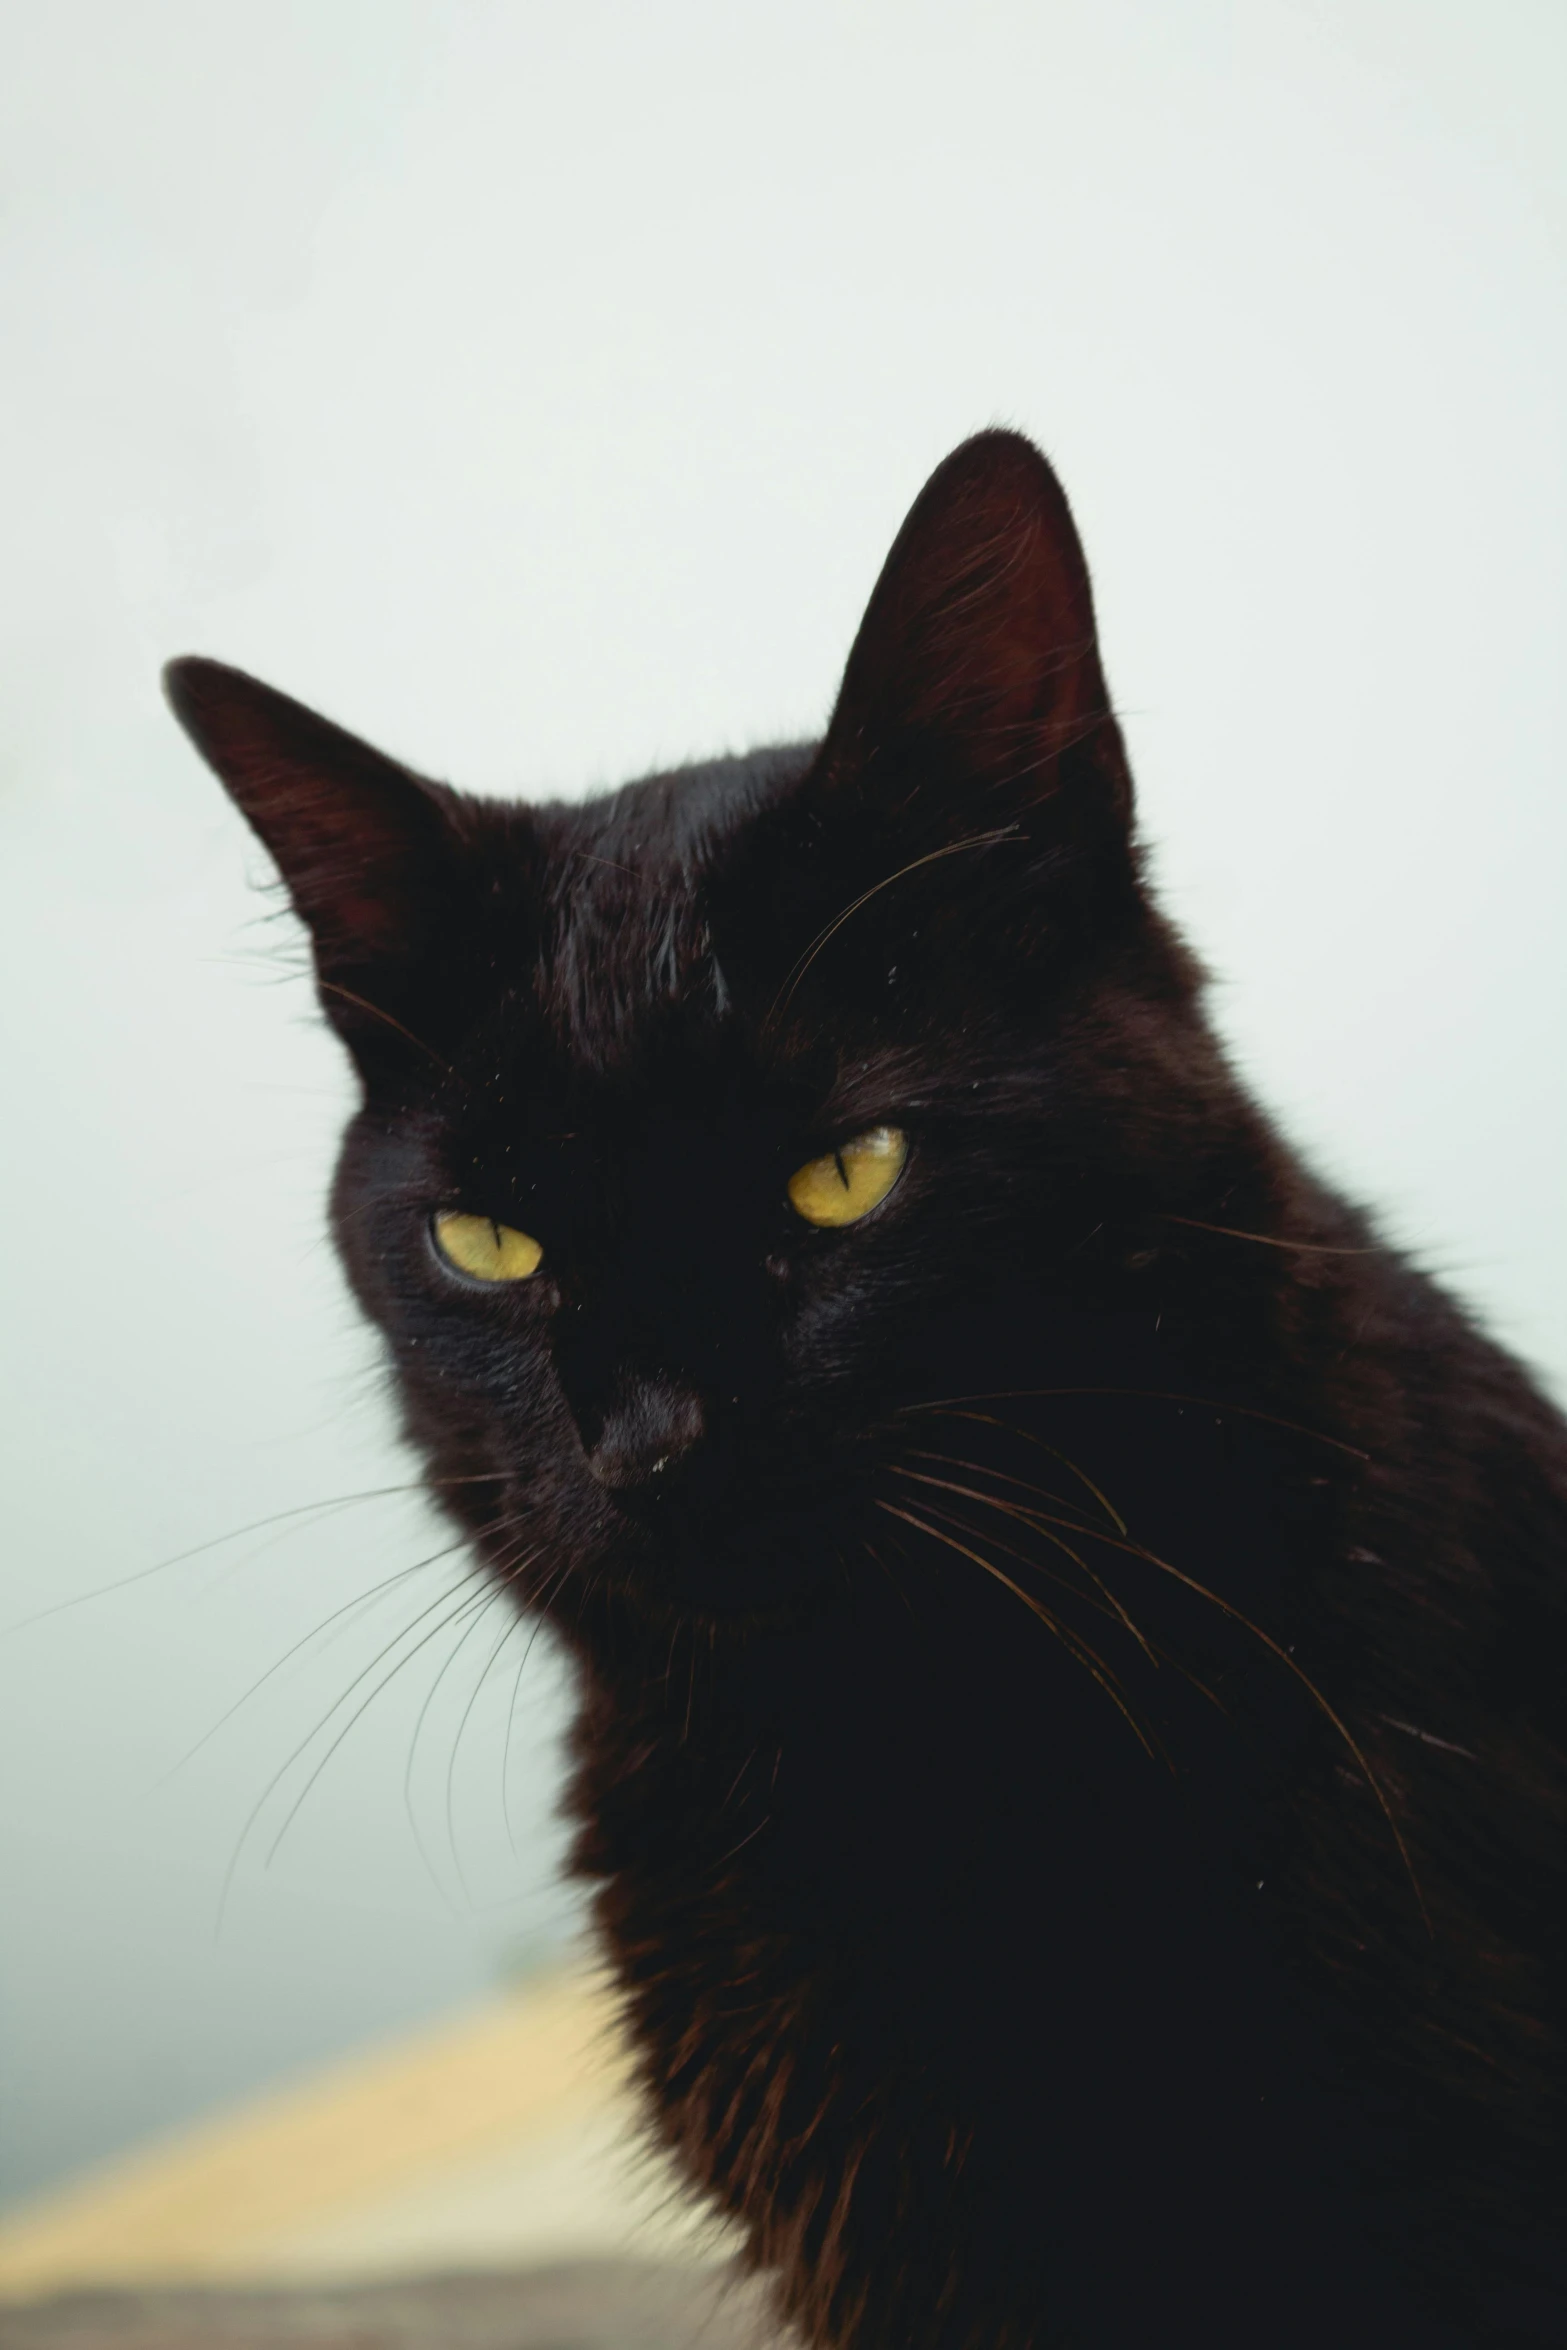 a black cat sitting on top of a wooden table, an album cover, unsplash, scowling, sleek yellow eyes, profile picture, getty images